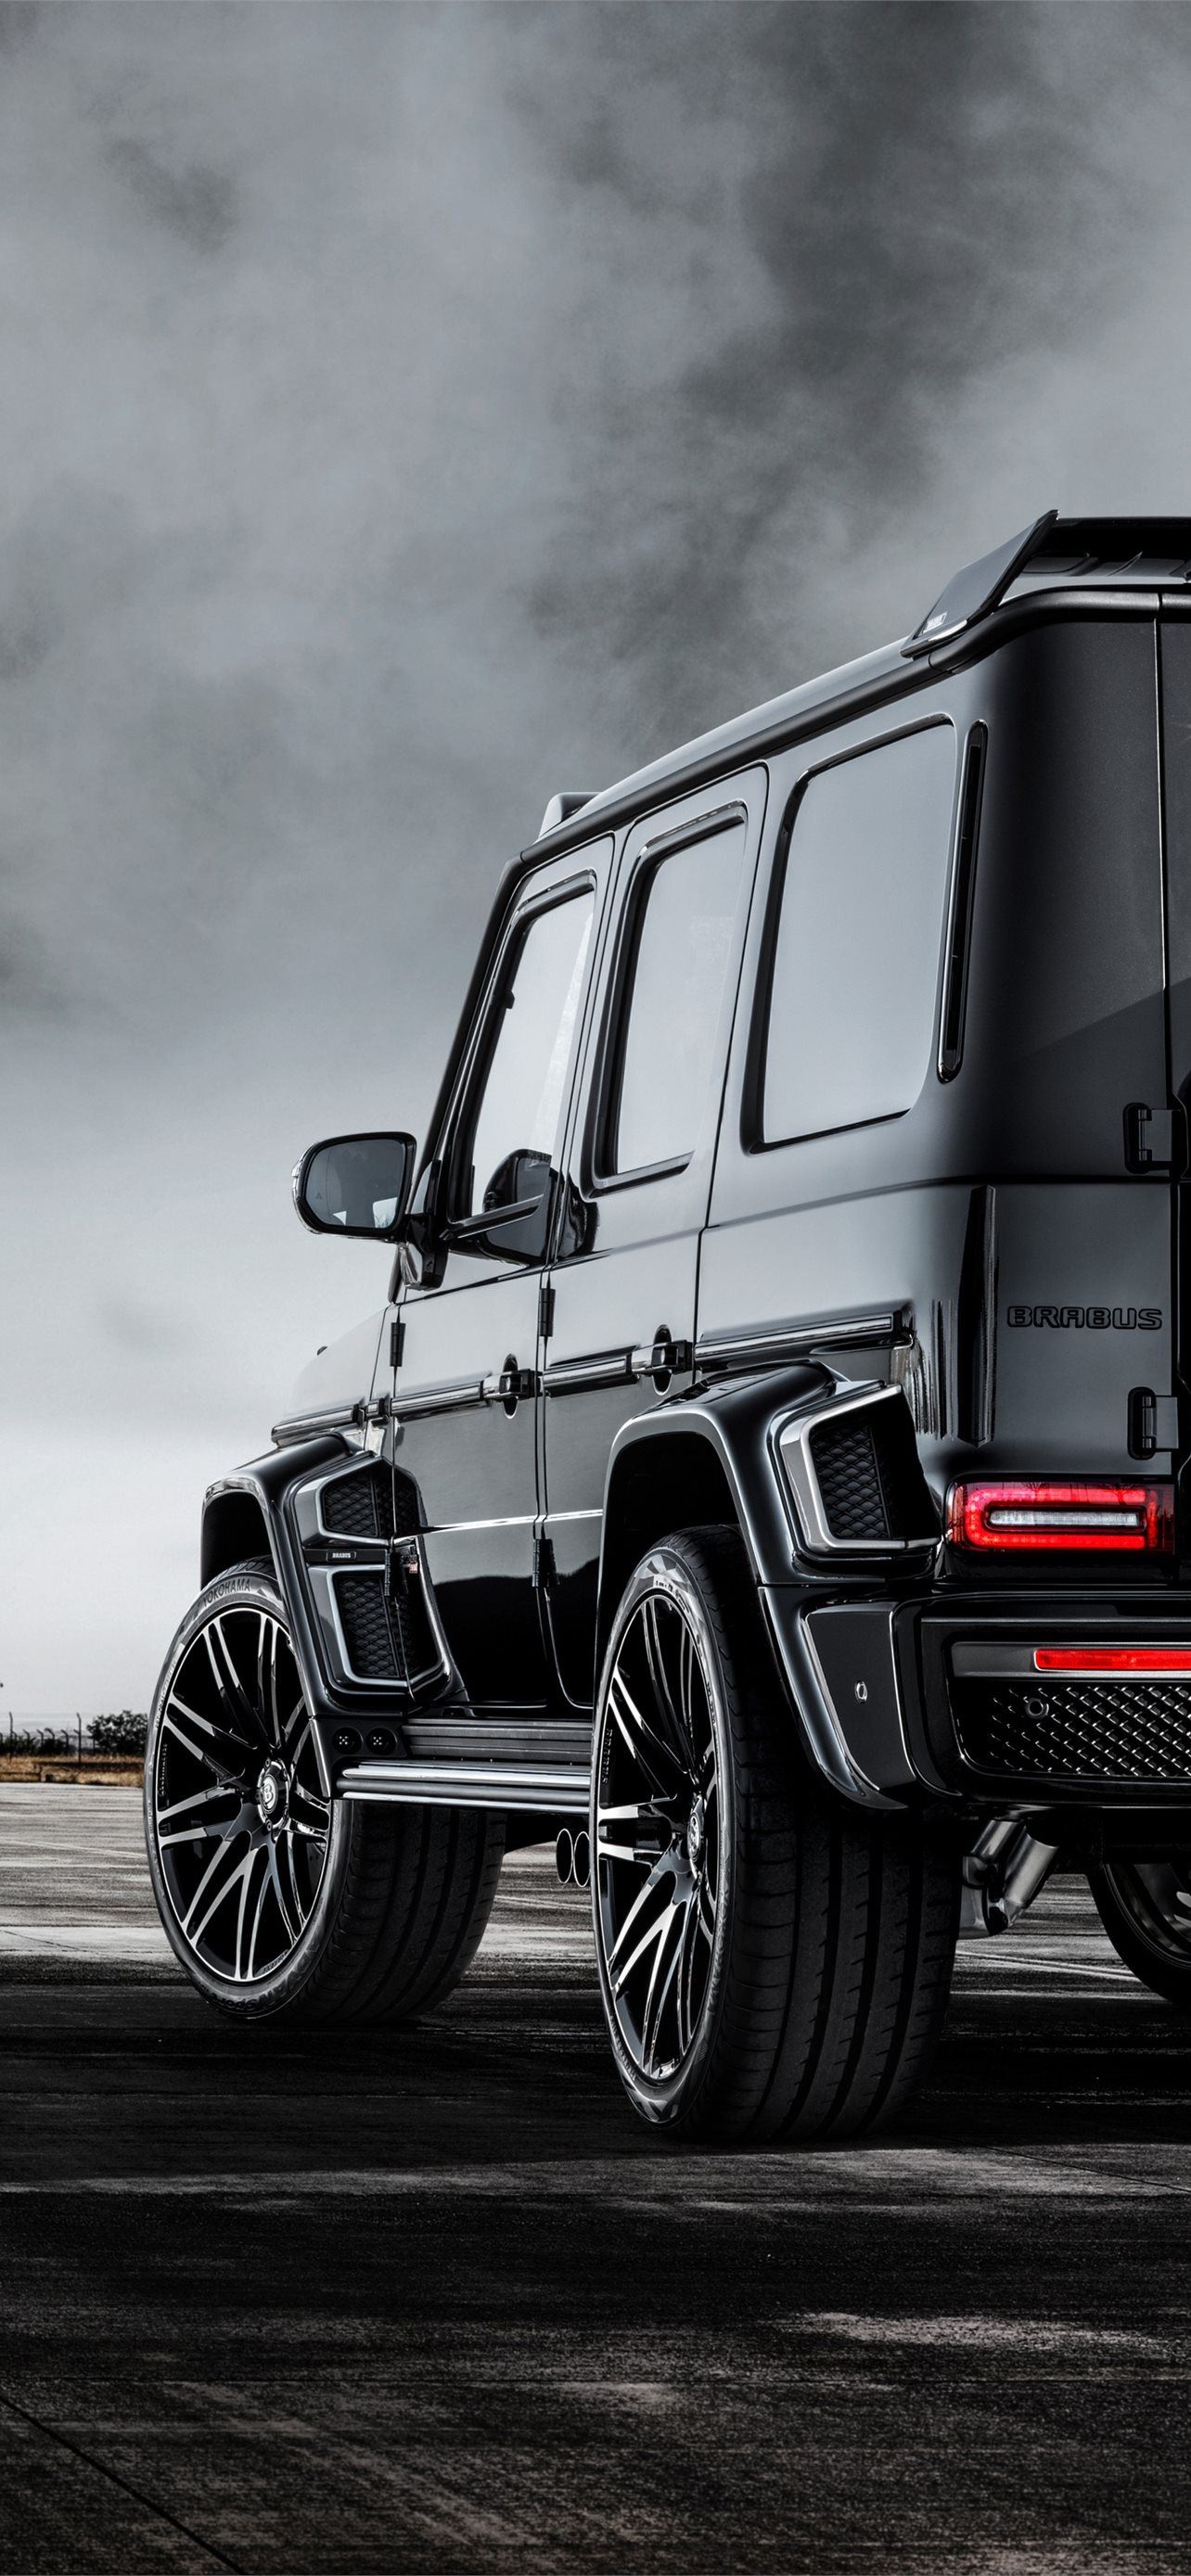 Mercedes-Benz G-Class, Best iPhone wallpapers, Classic luxury, Robust design, 1290x2780 HD Phone